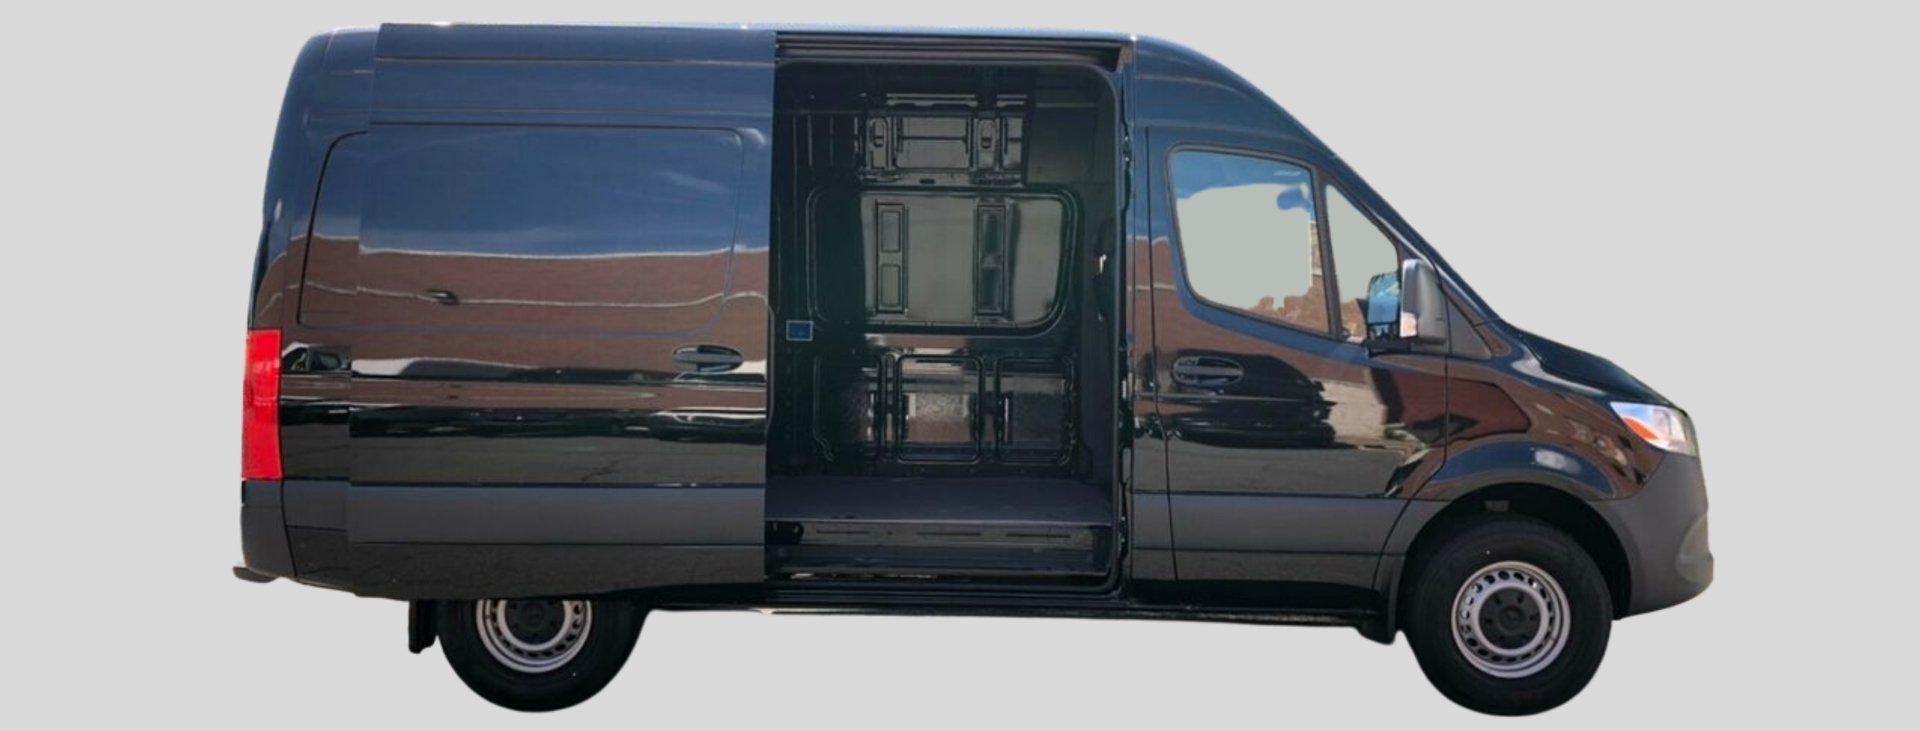 5 Things to know when shopping for cargo van seats